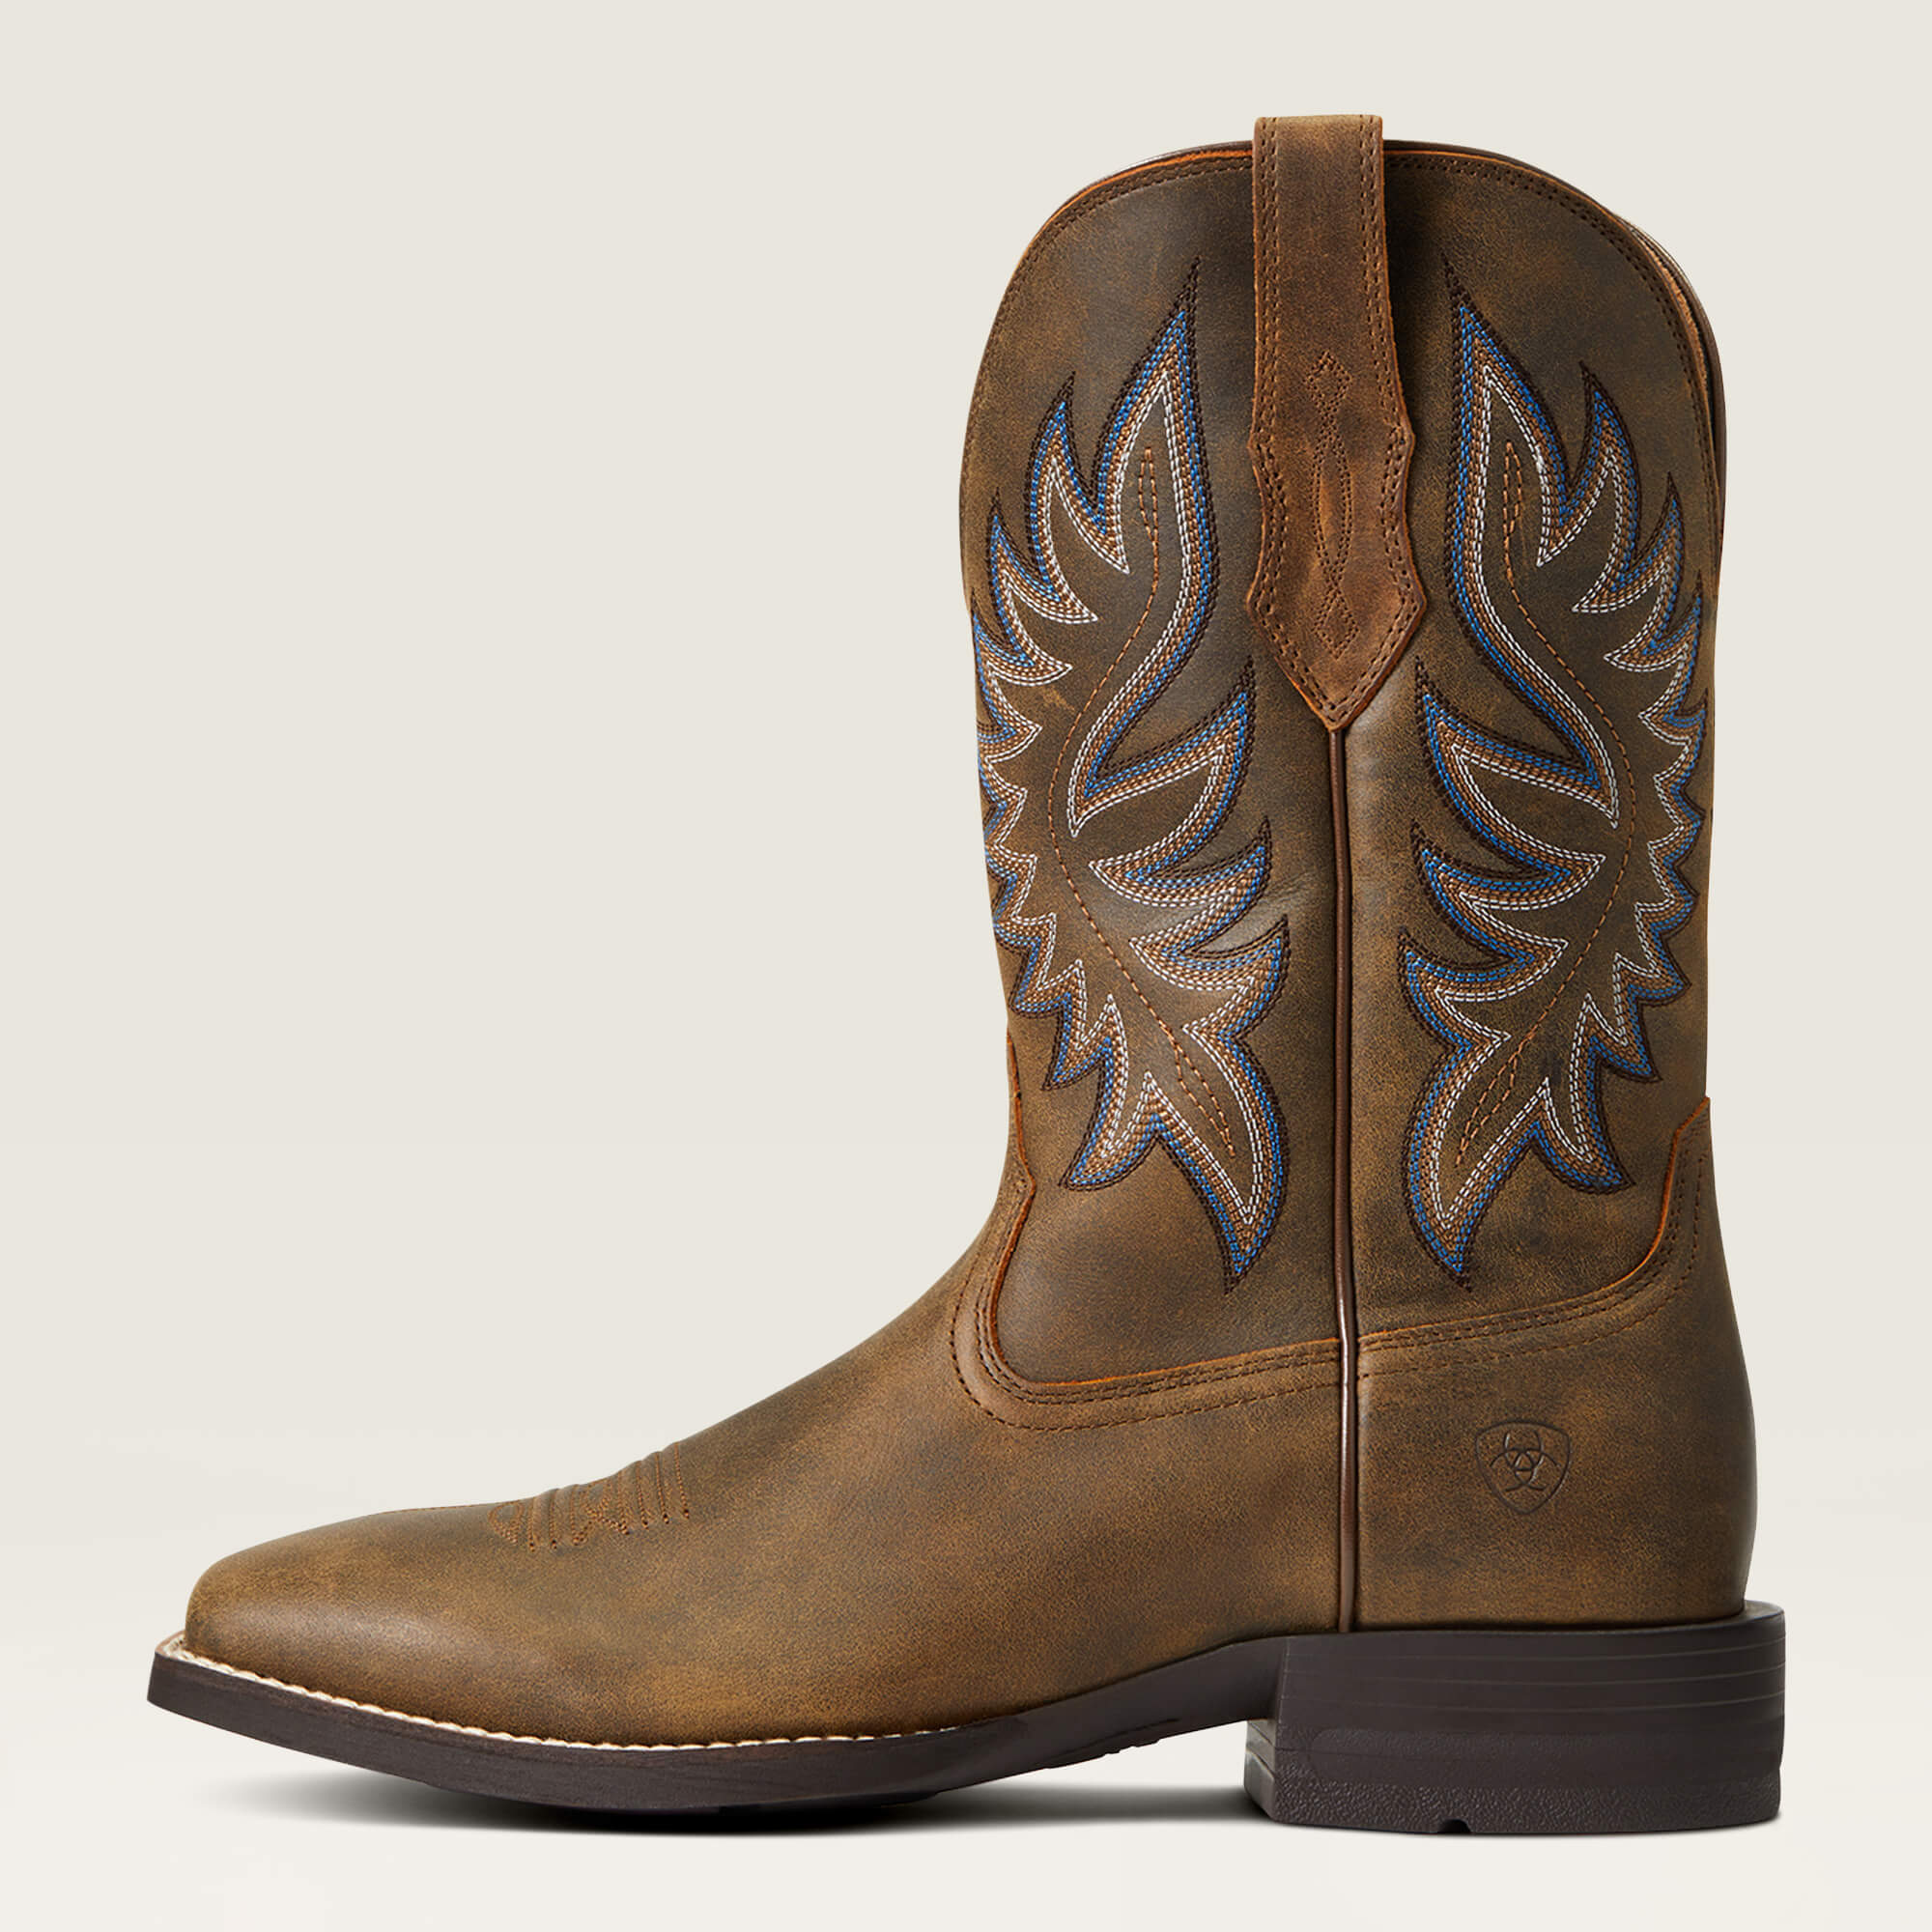 Men's Ariat Arena Rebound Tan Western Boots - The Boot Store